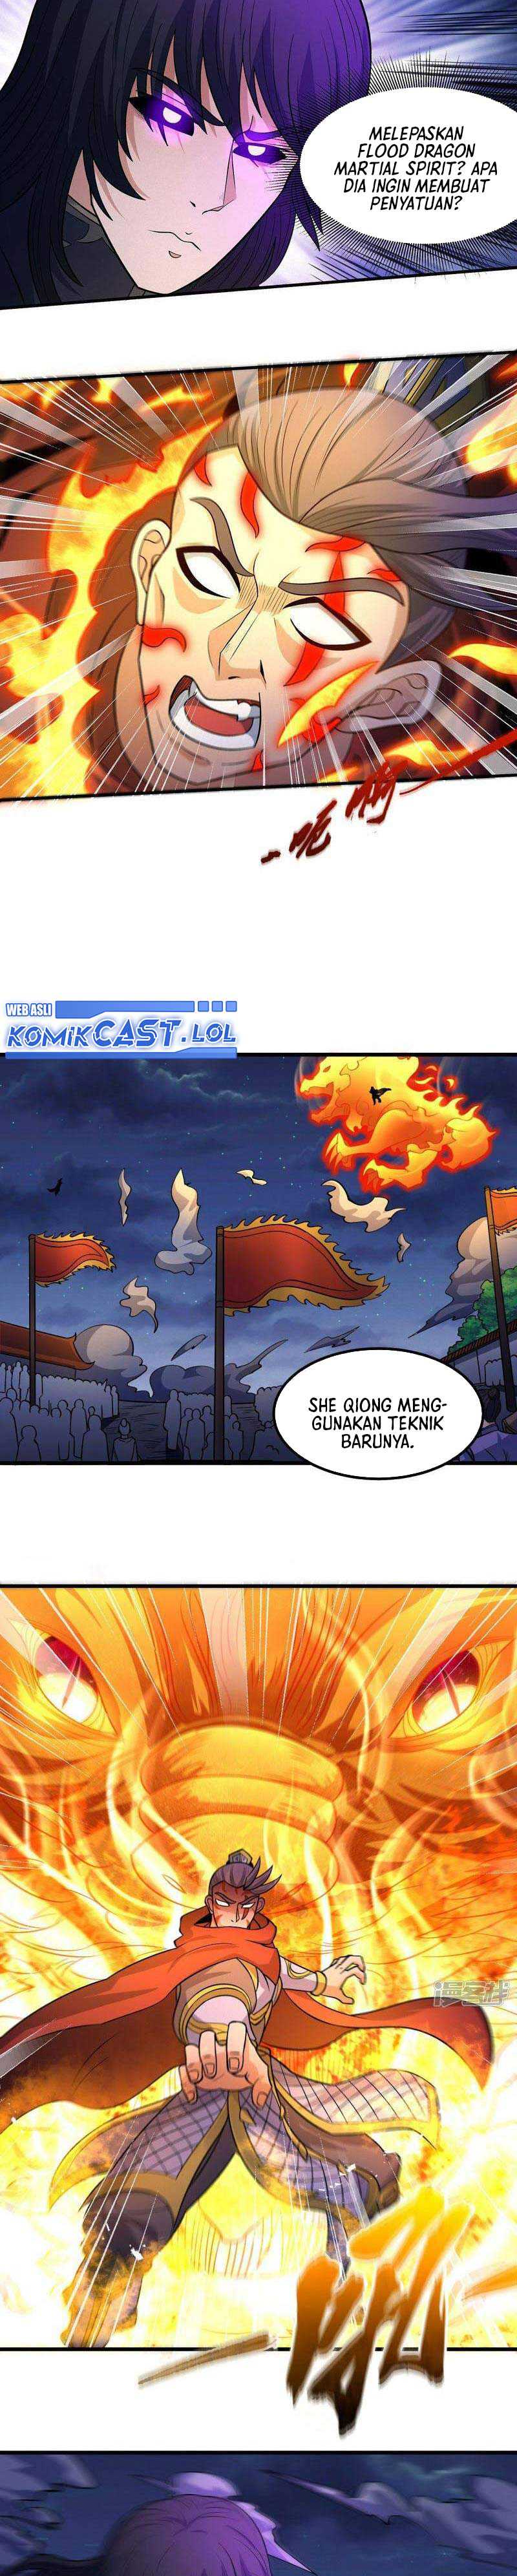 God of Martial Arts Chapter 558